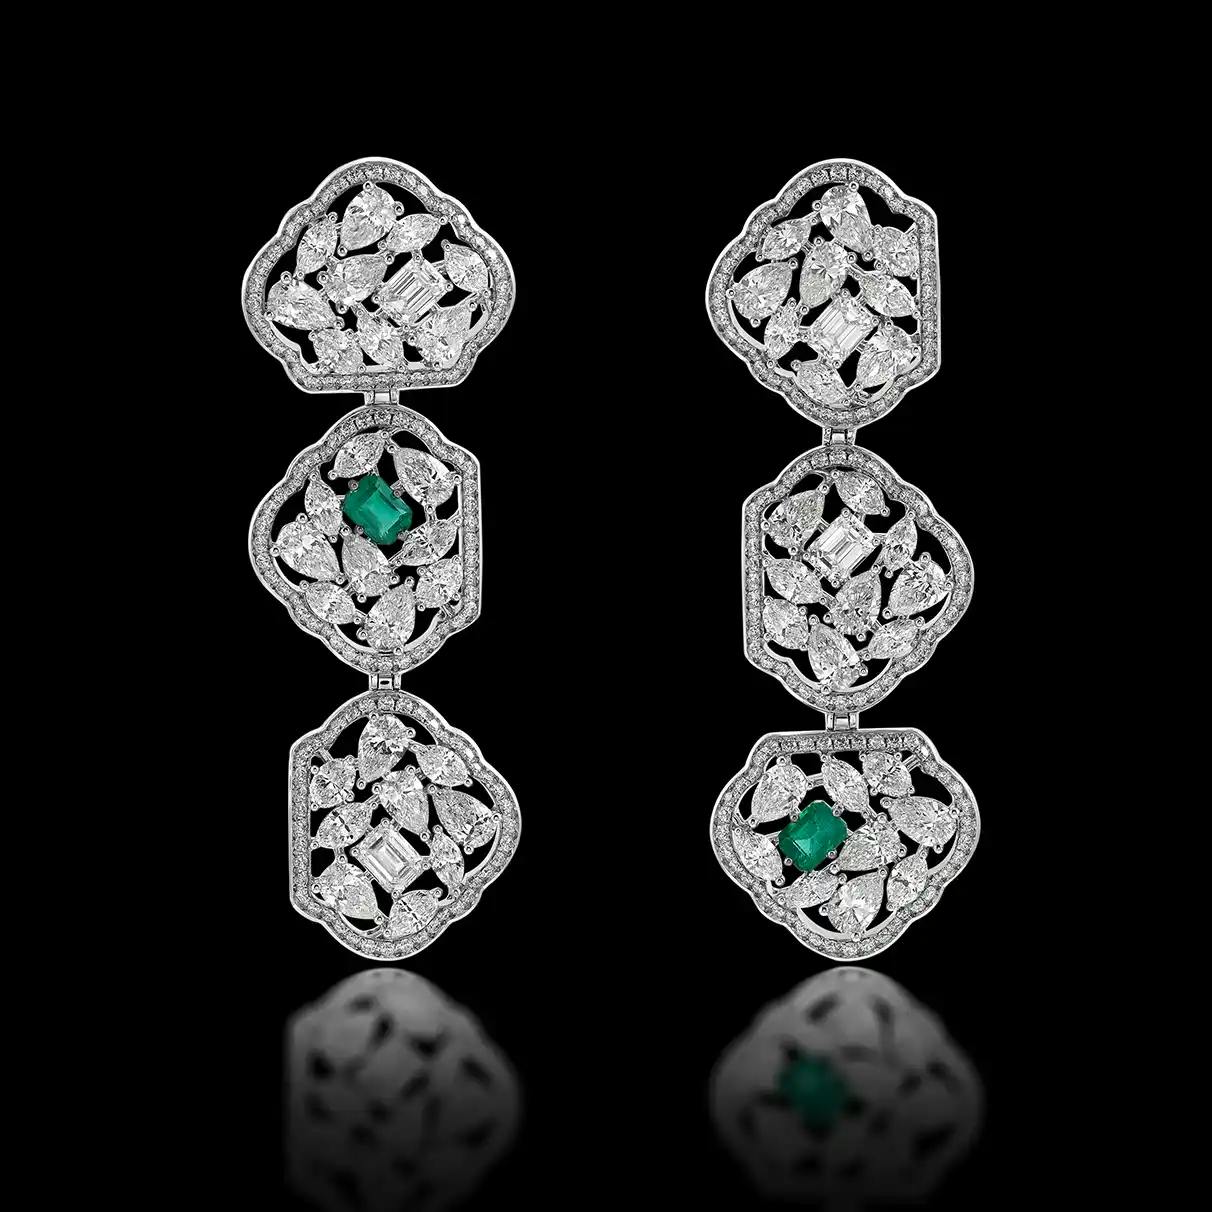 18K recycled white gold earrings with marquise, oval, round, pear and princess-cut white diamonds, Zambian emeralds.